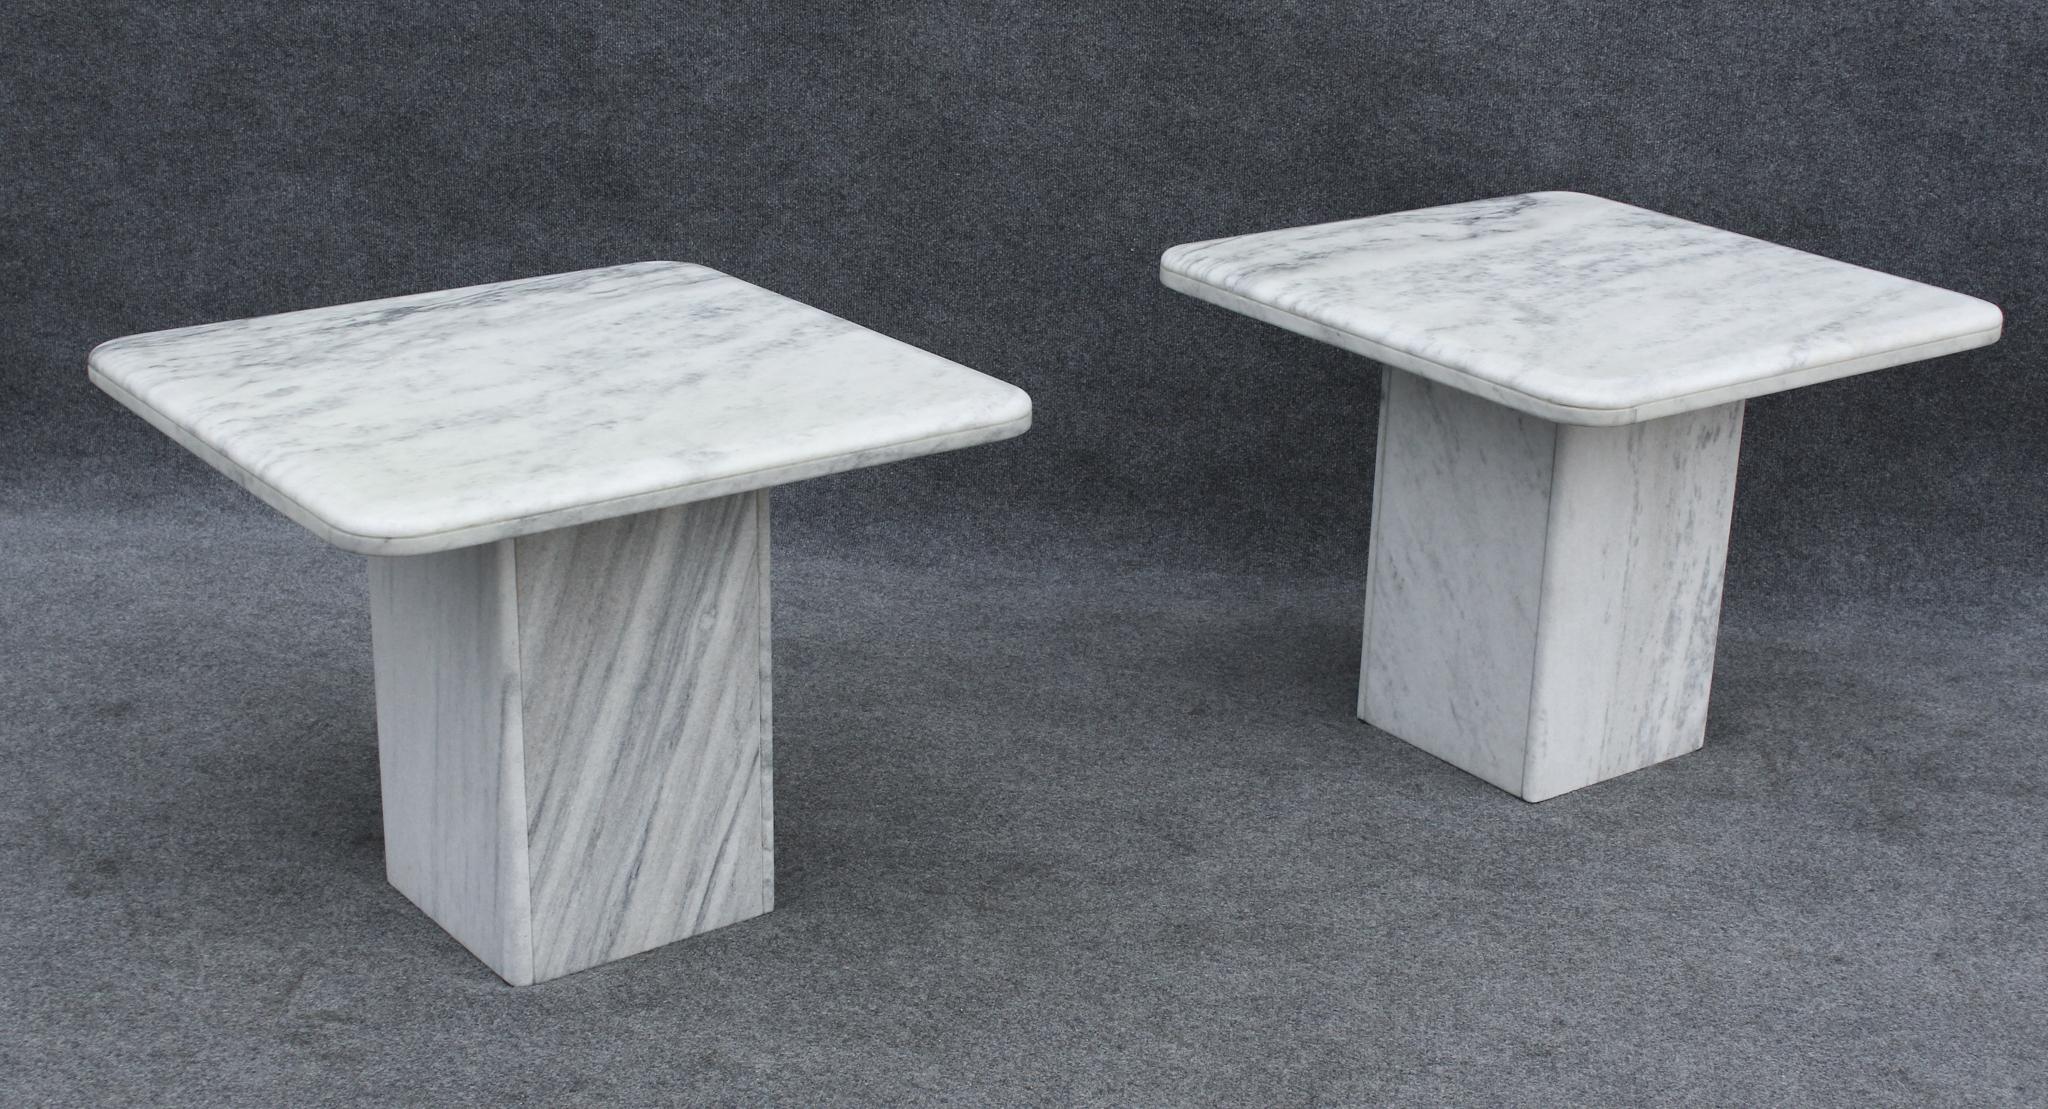 Pair of Italian Side Tables in White Marble With Grey Veining 1970s For Sale 6